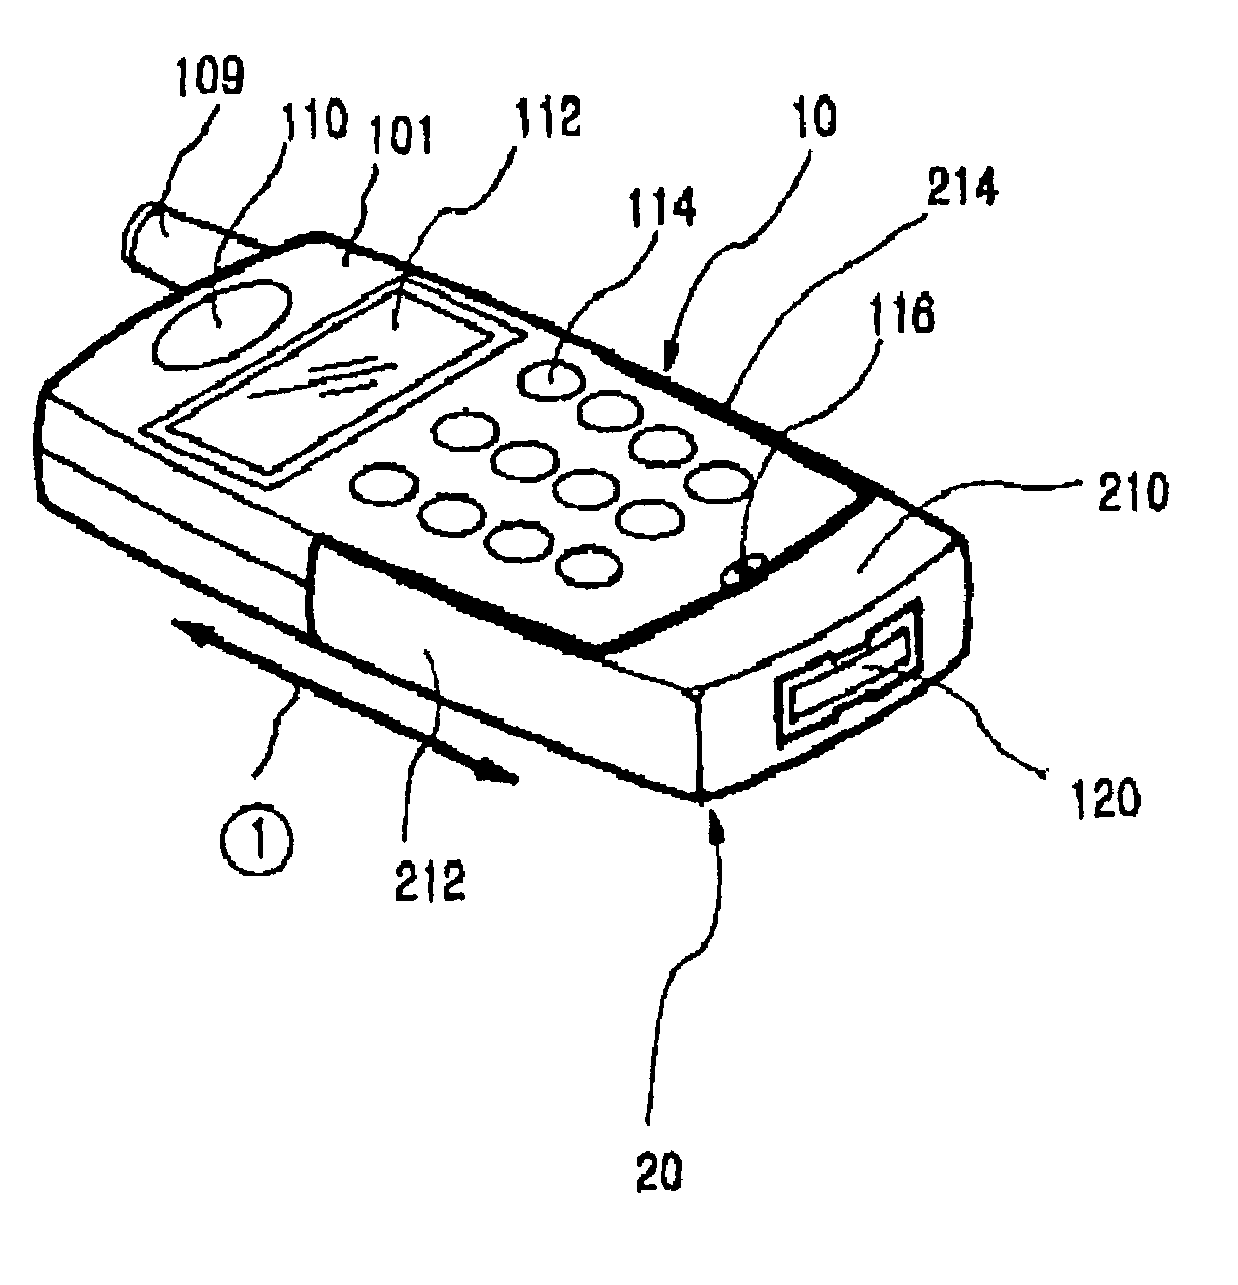 Replaceable sub-housing and interchangeable mobile telephone terminal using the same to be used both as flip-type terminal and bar-type terminal